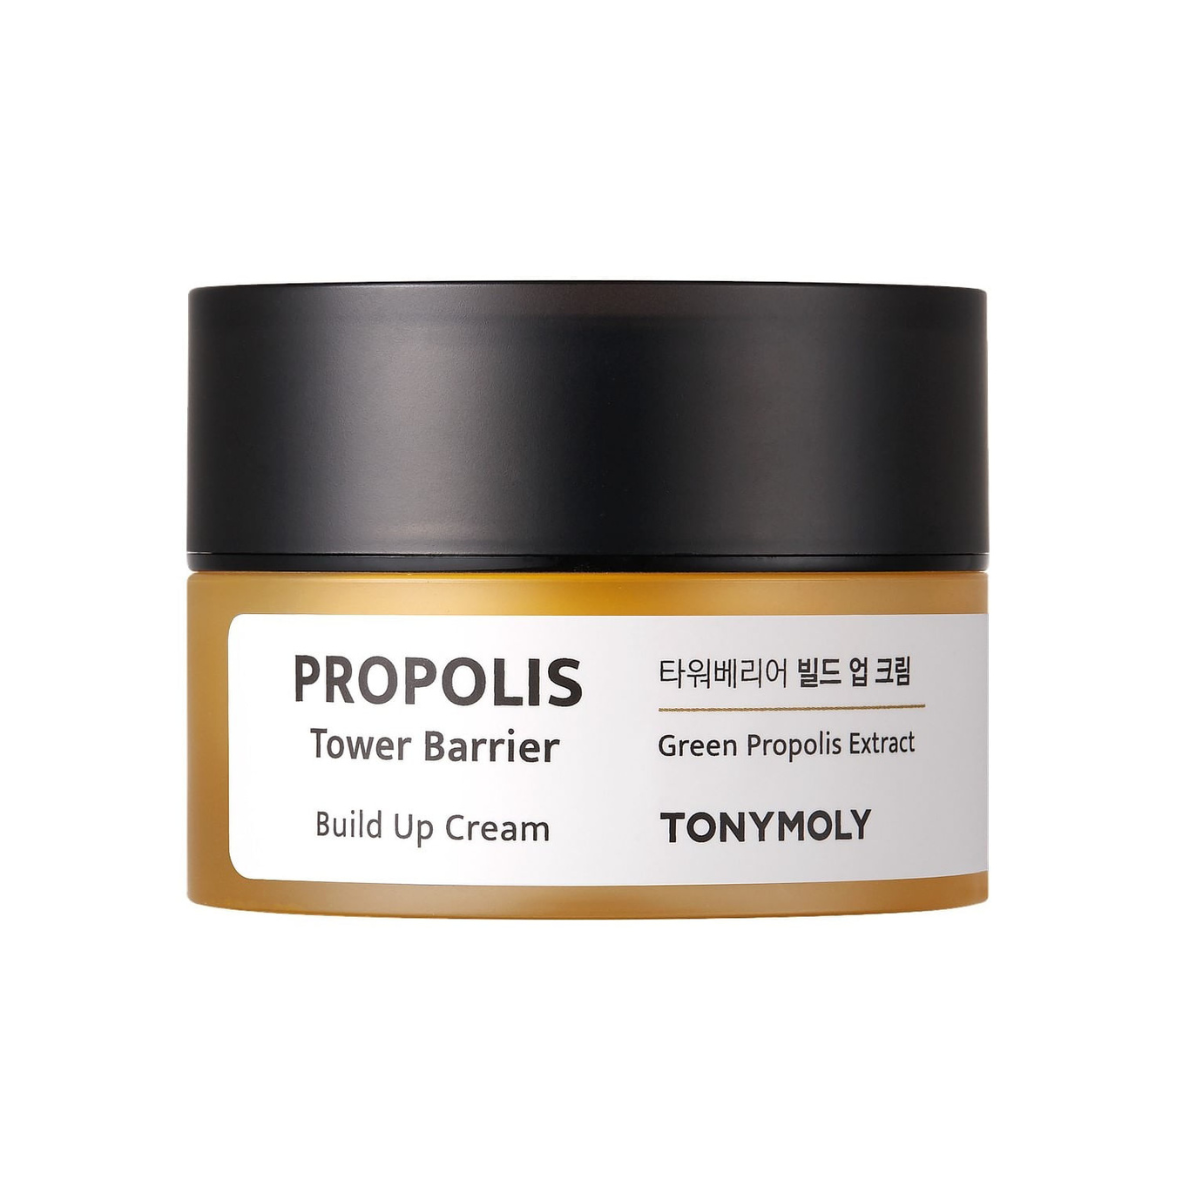 Tony Moly Propolis Tower Barrier Build Up Cream